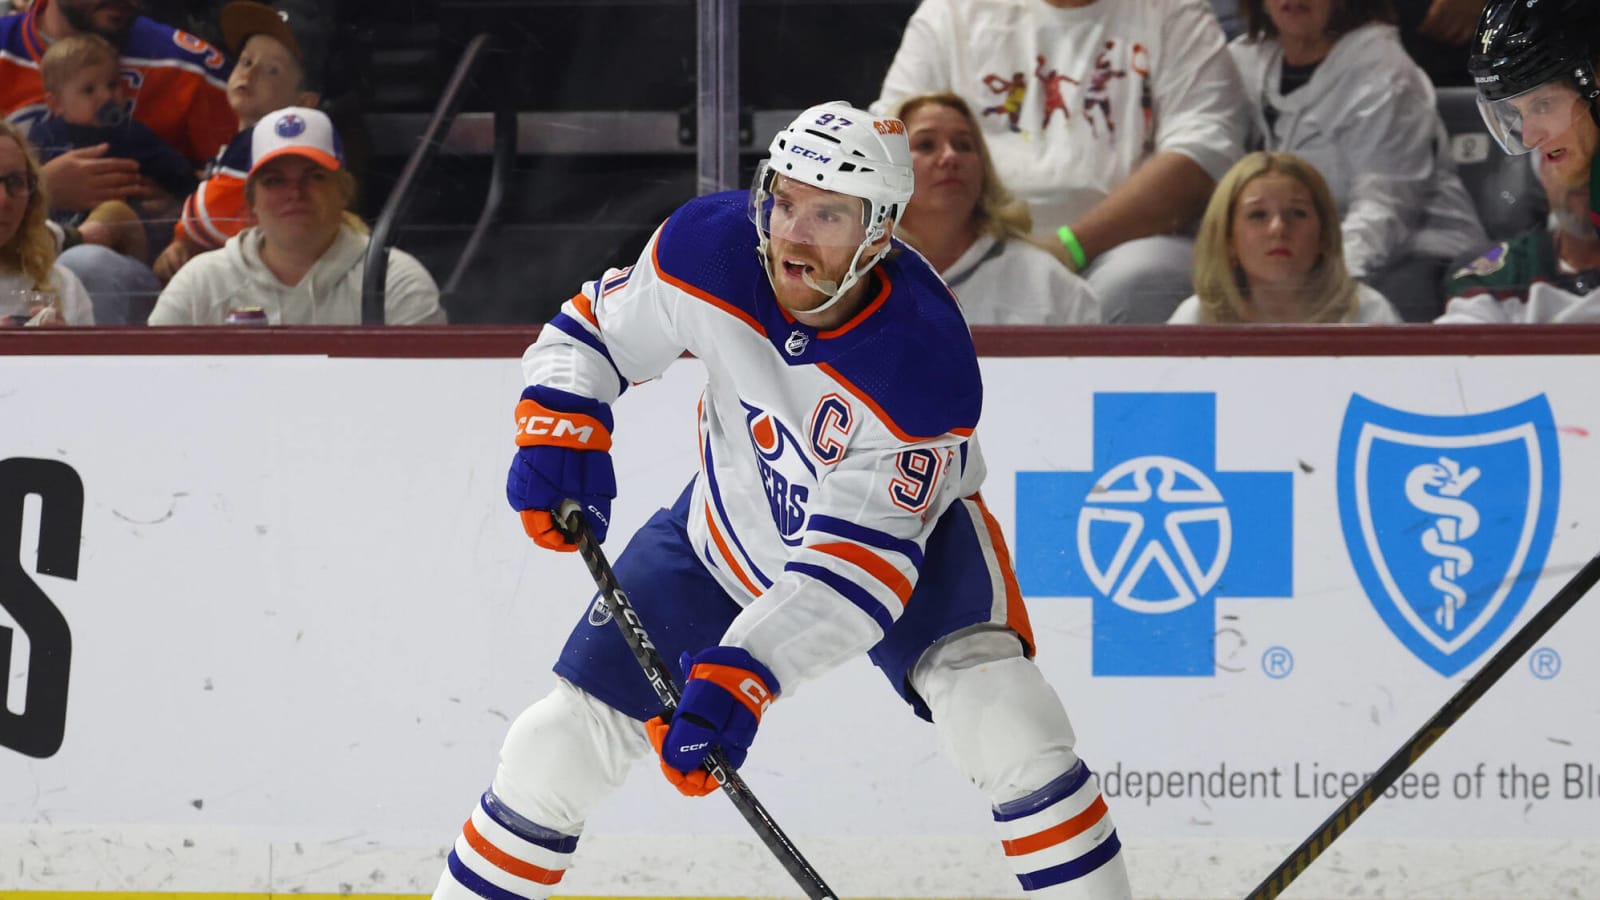 McDavid Out to Change Narrative for Oilers in Series vs. Canucks